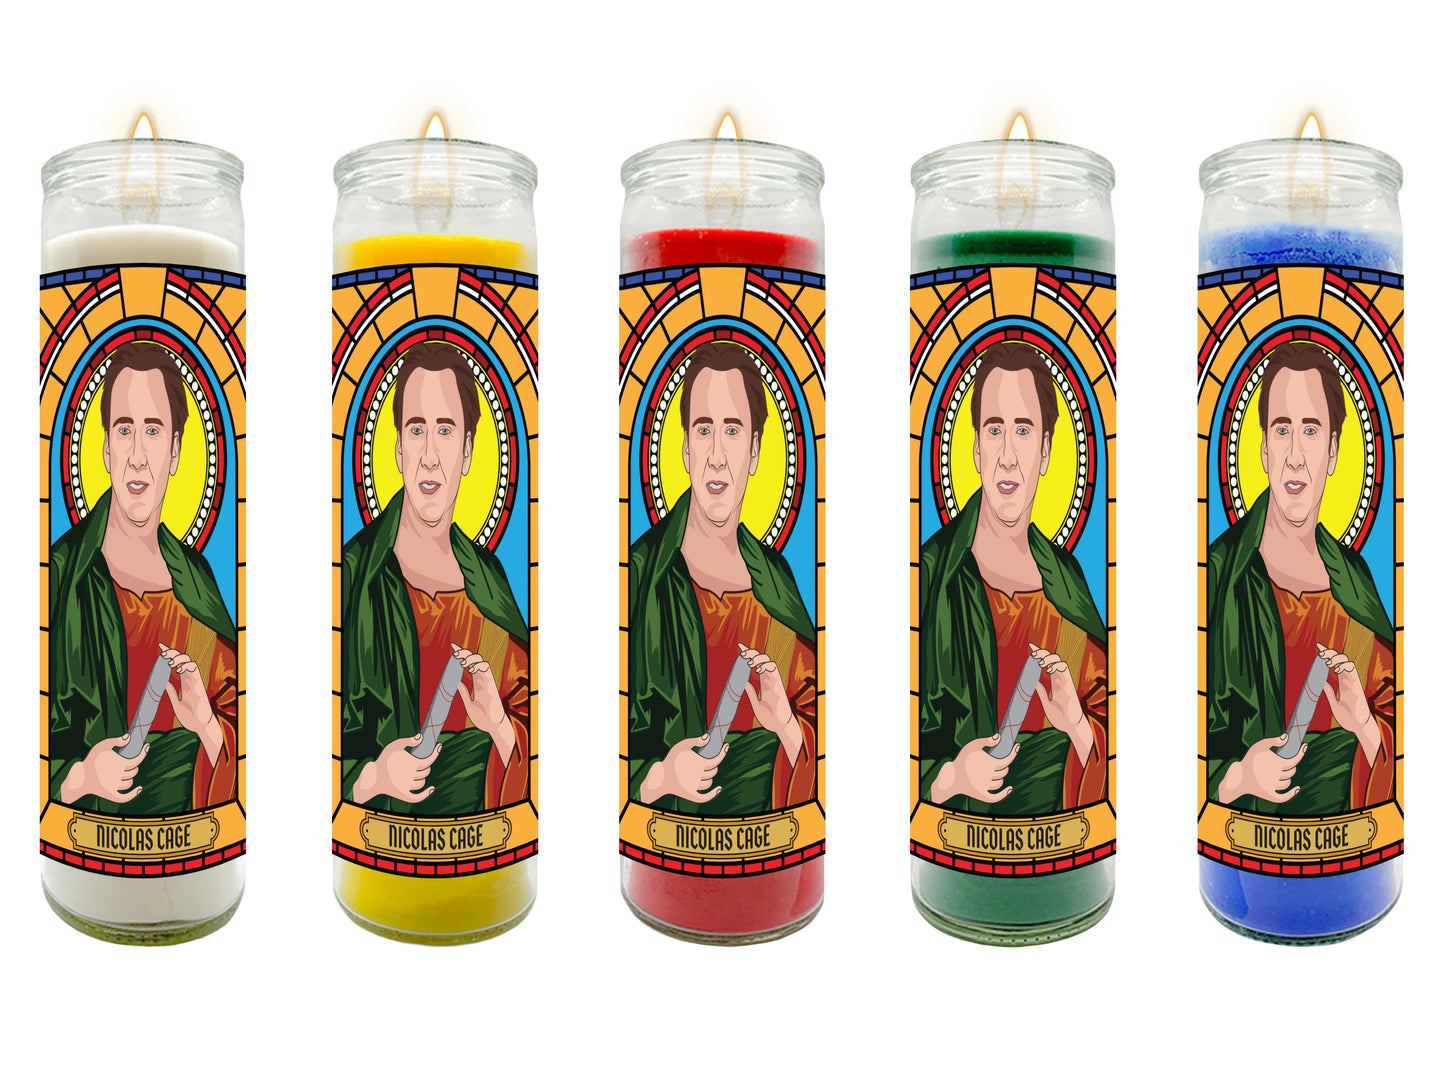 Nicolas Cage Illustrated Prayer Candle